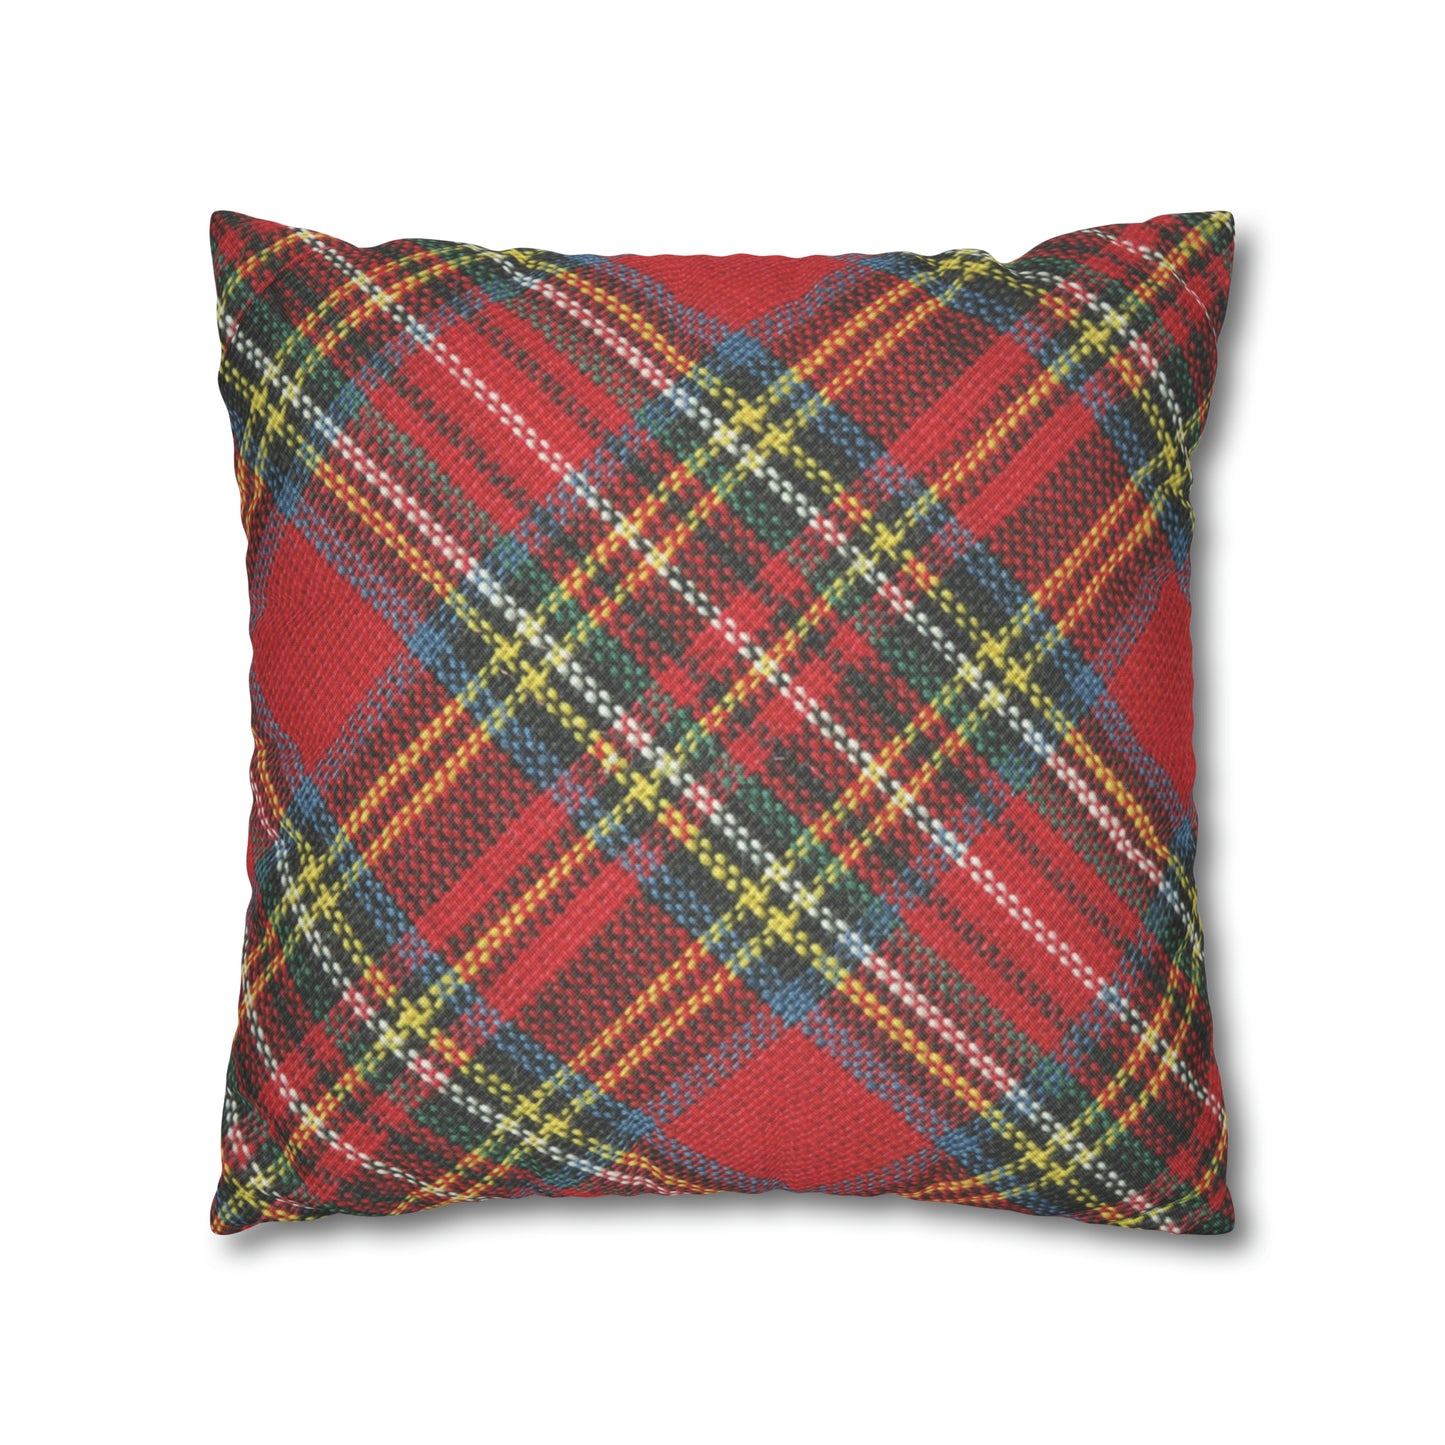 An American made Printify red plaid pillow case on a white background.